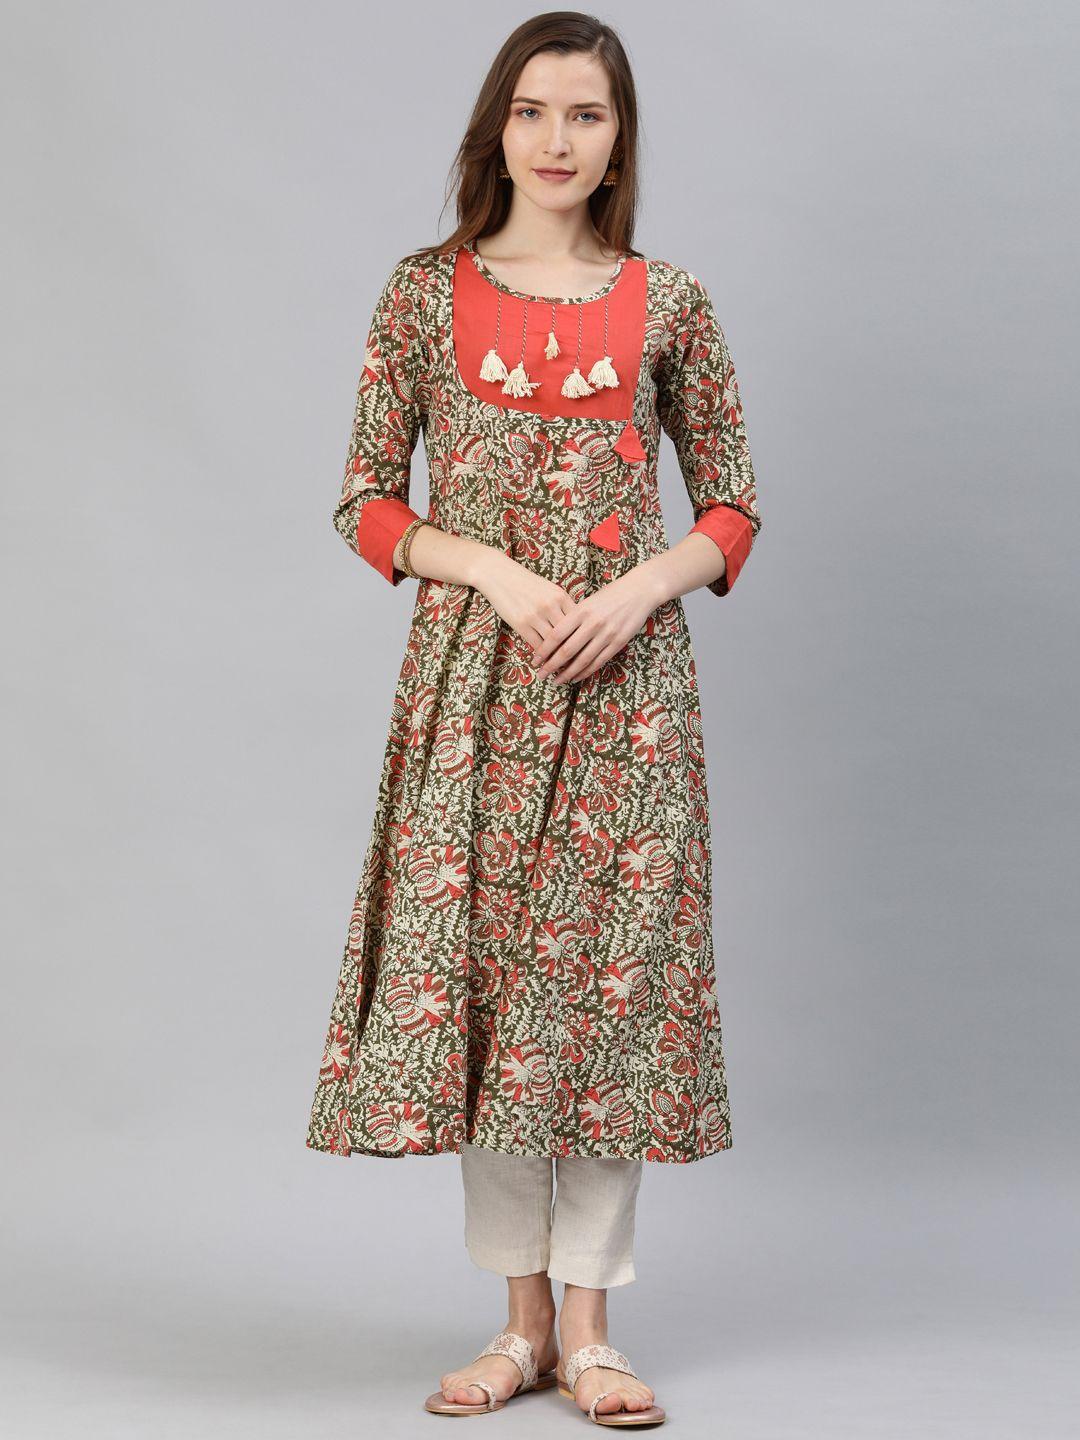 yash gallery women peach-coloured & olive green printed a-line kurta with tassel details